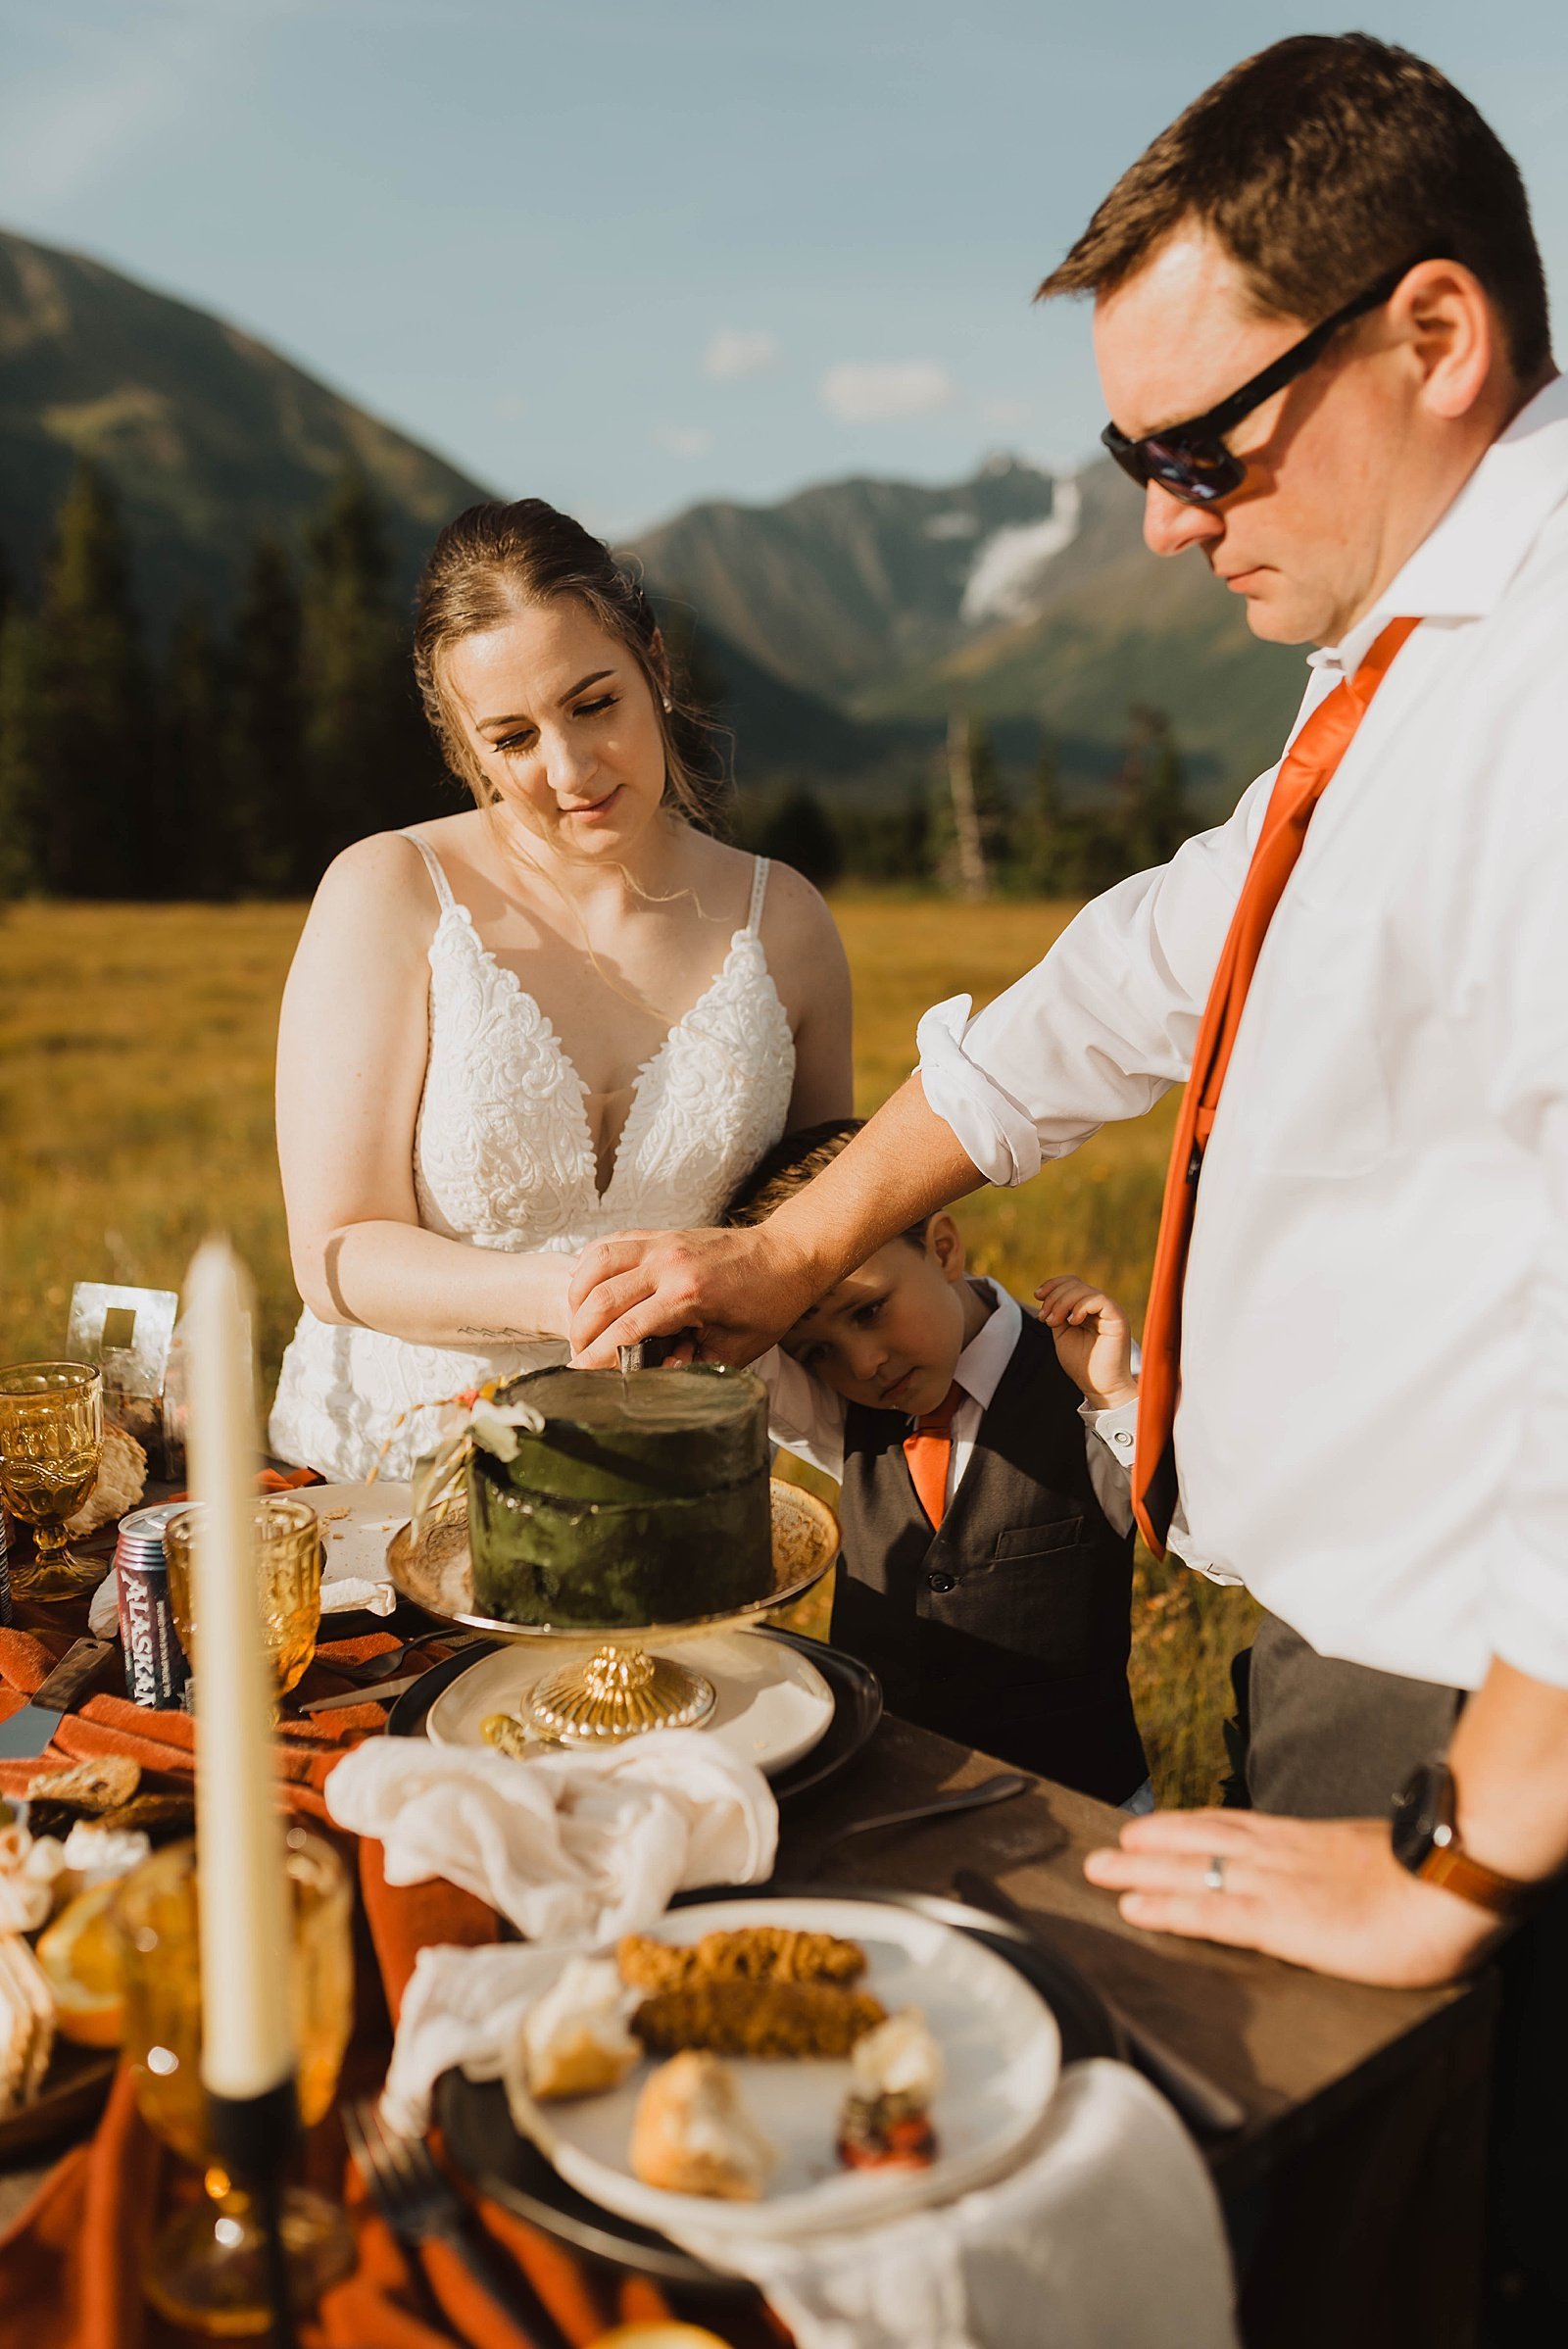  Bride and groom cut the cake at private dinner in a field in Alaska  